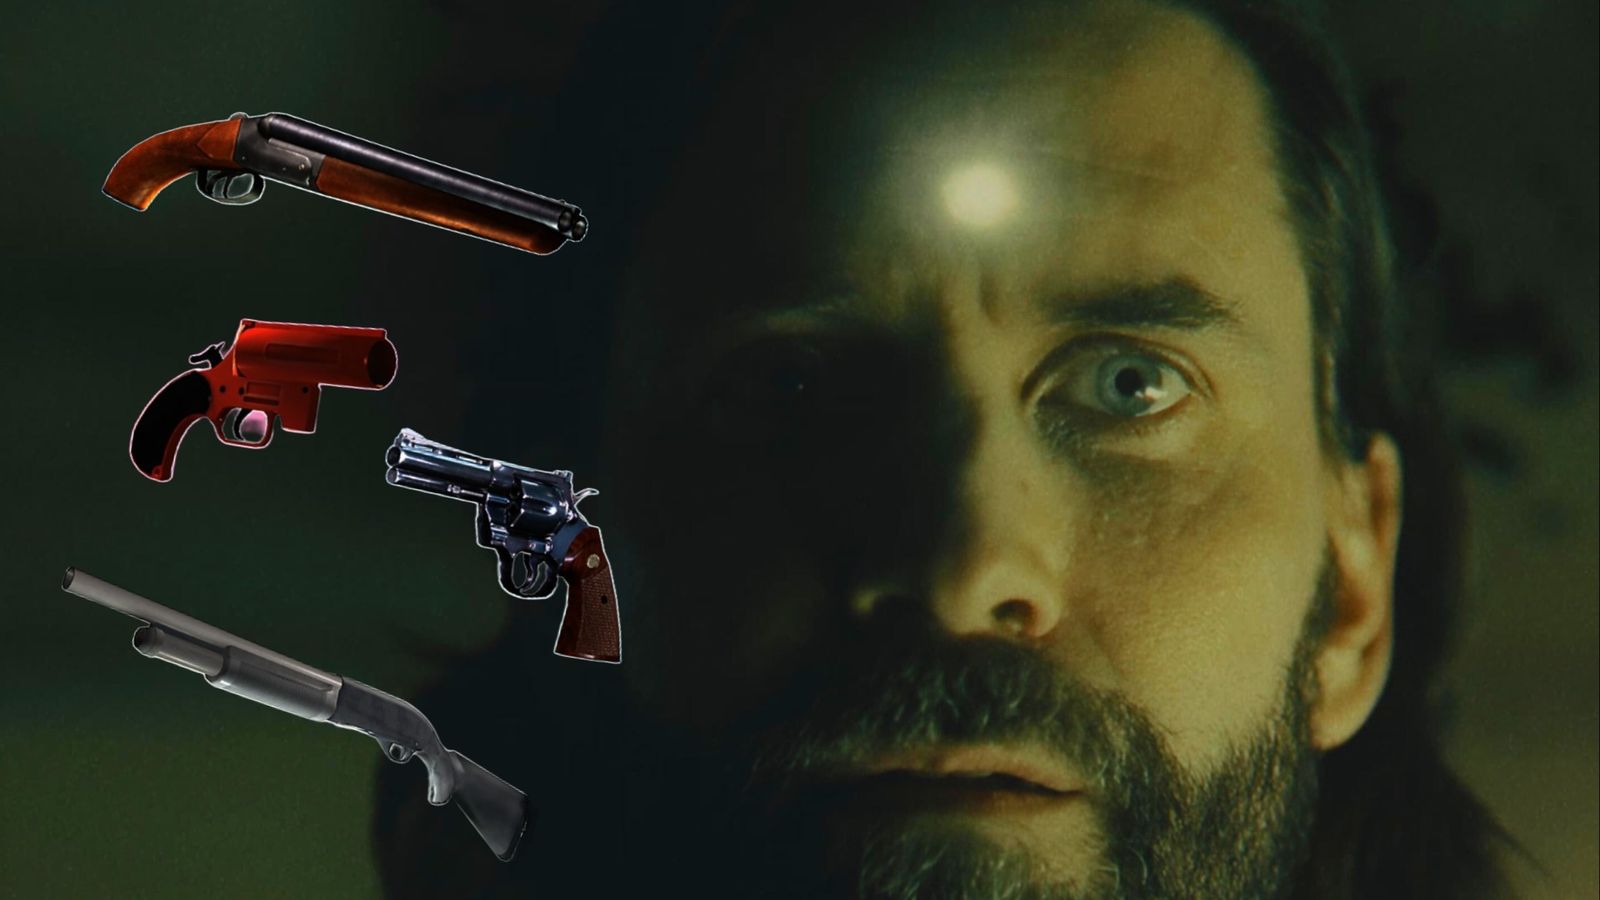 Alan Wake looking at the viewer with a flare gun, revolver, sawed-off shotgun and pump action shotgun floating nearby